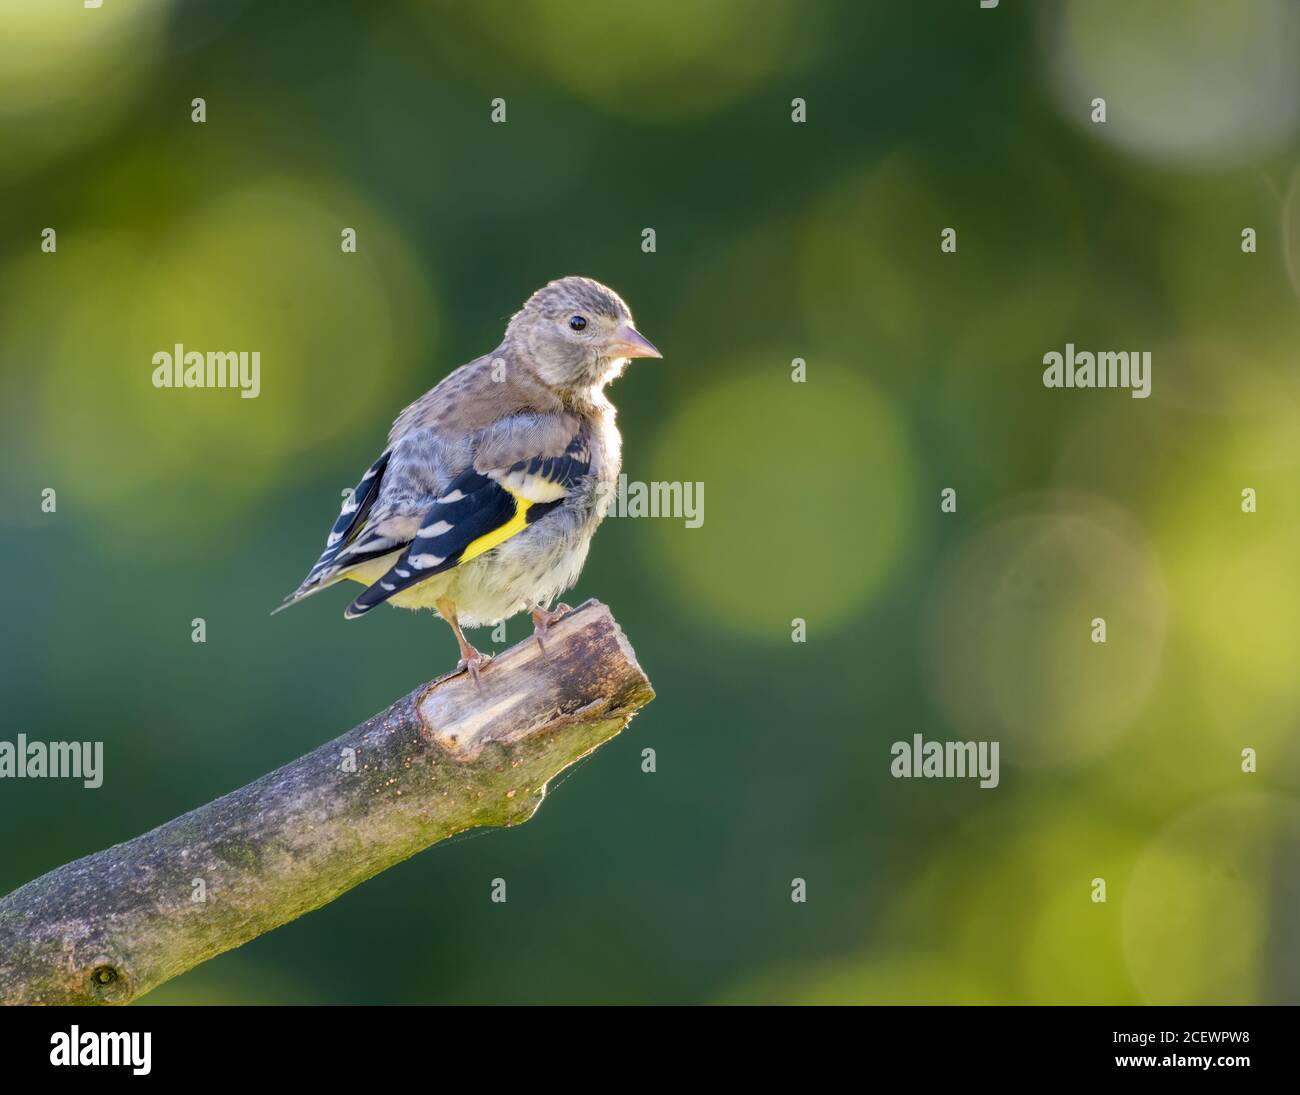 Juvenile Goldfinch(Carduelis carduelis) perched on a twig Stock Photo